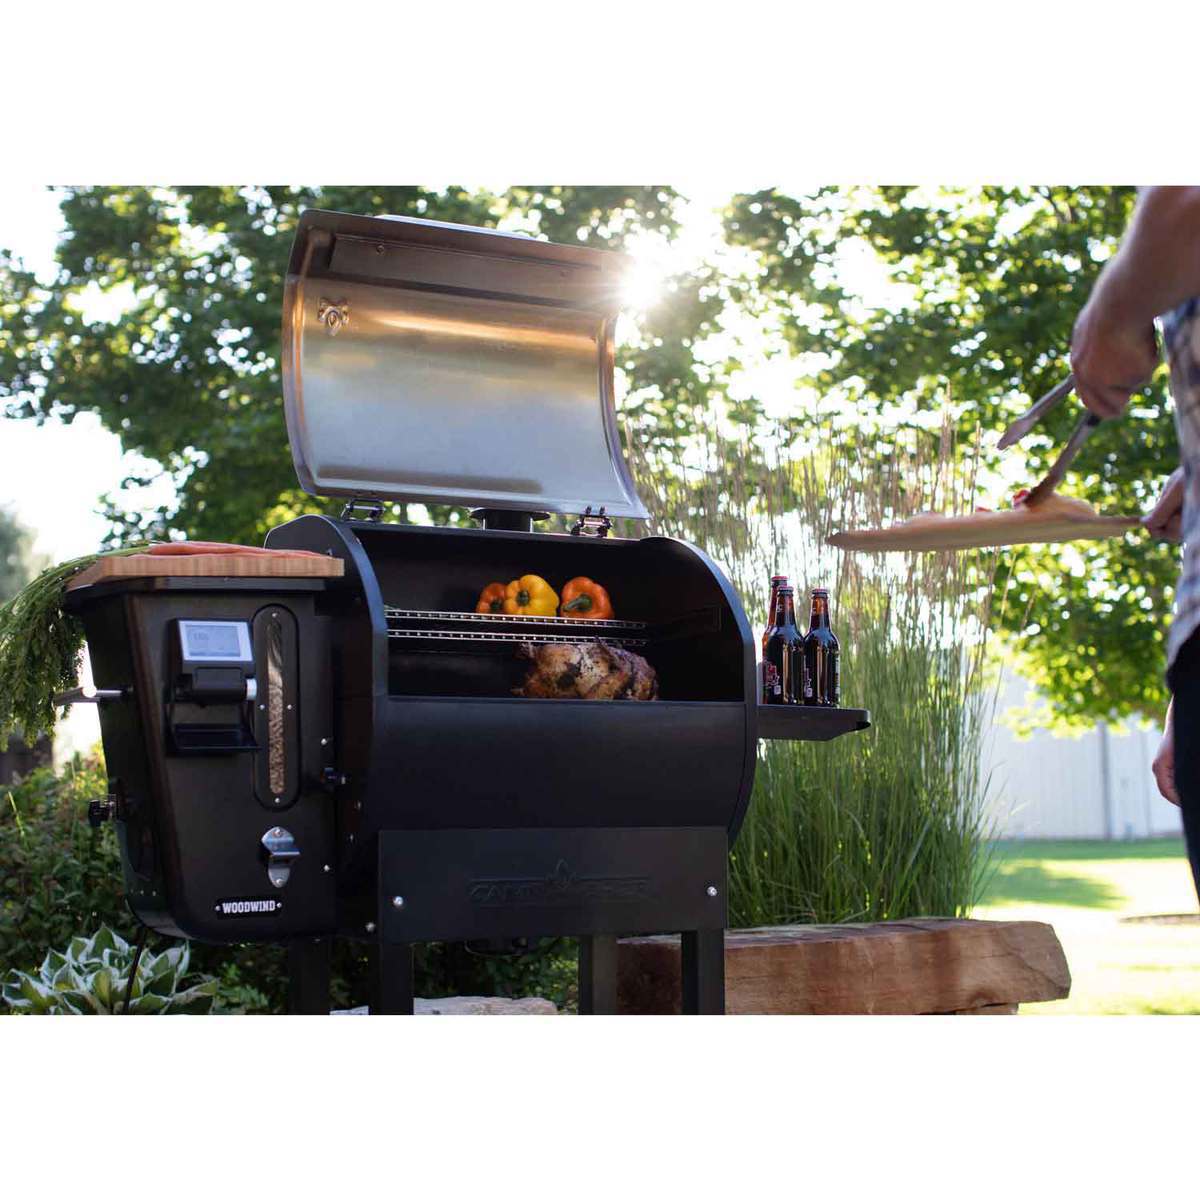 Camp Chef Woodwind WiFi 24 Pellet Grill - Black/Stainless Steel | Sportsman's Warehouse